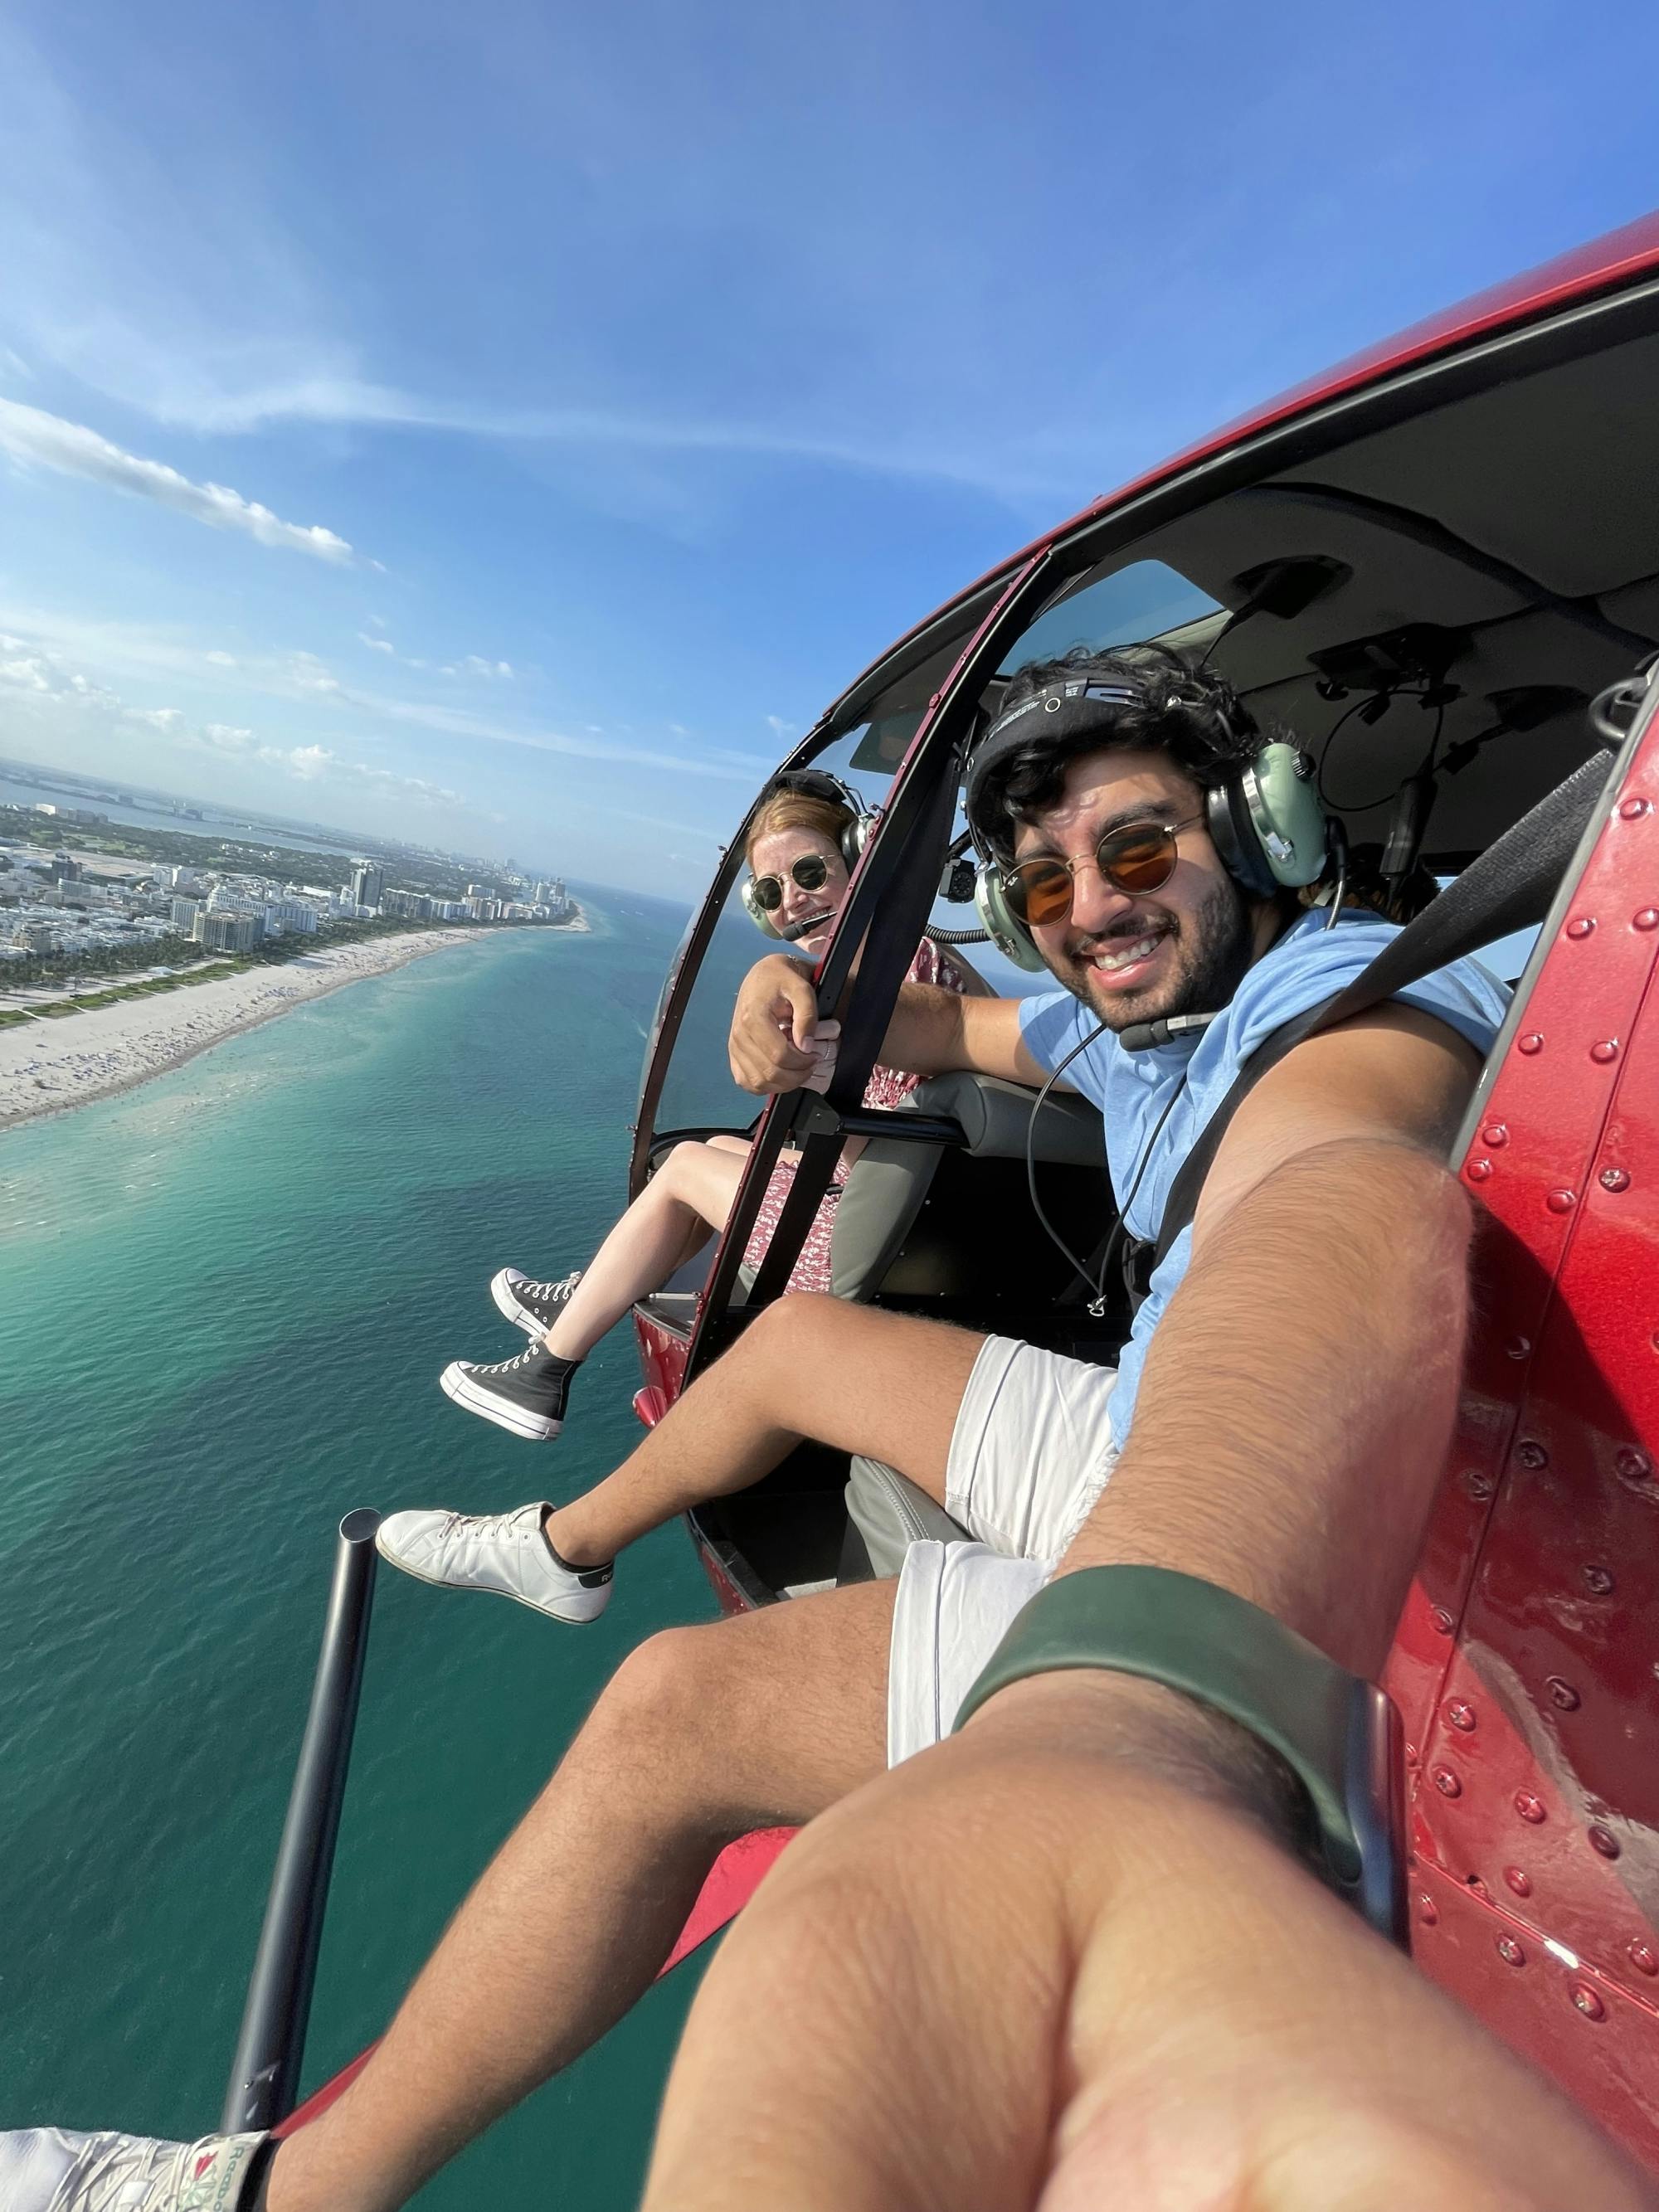 Miami Beach 35 minutes helicopter tour from Fort Lauderdale